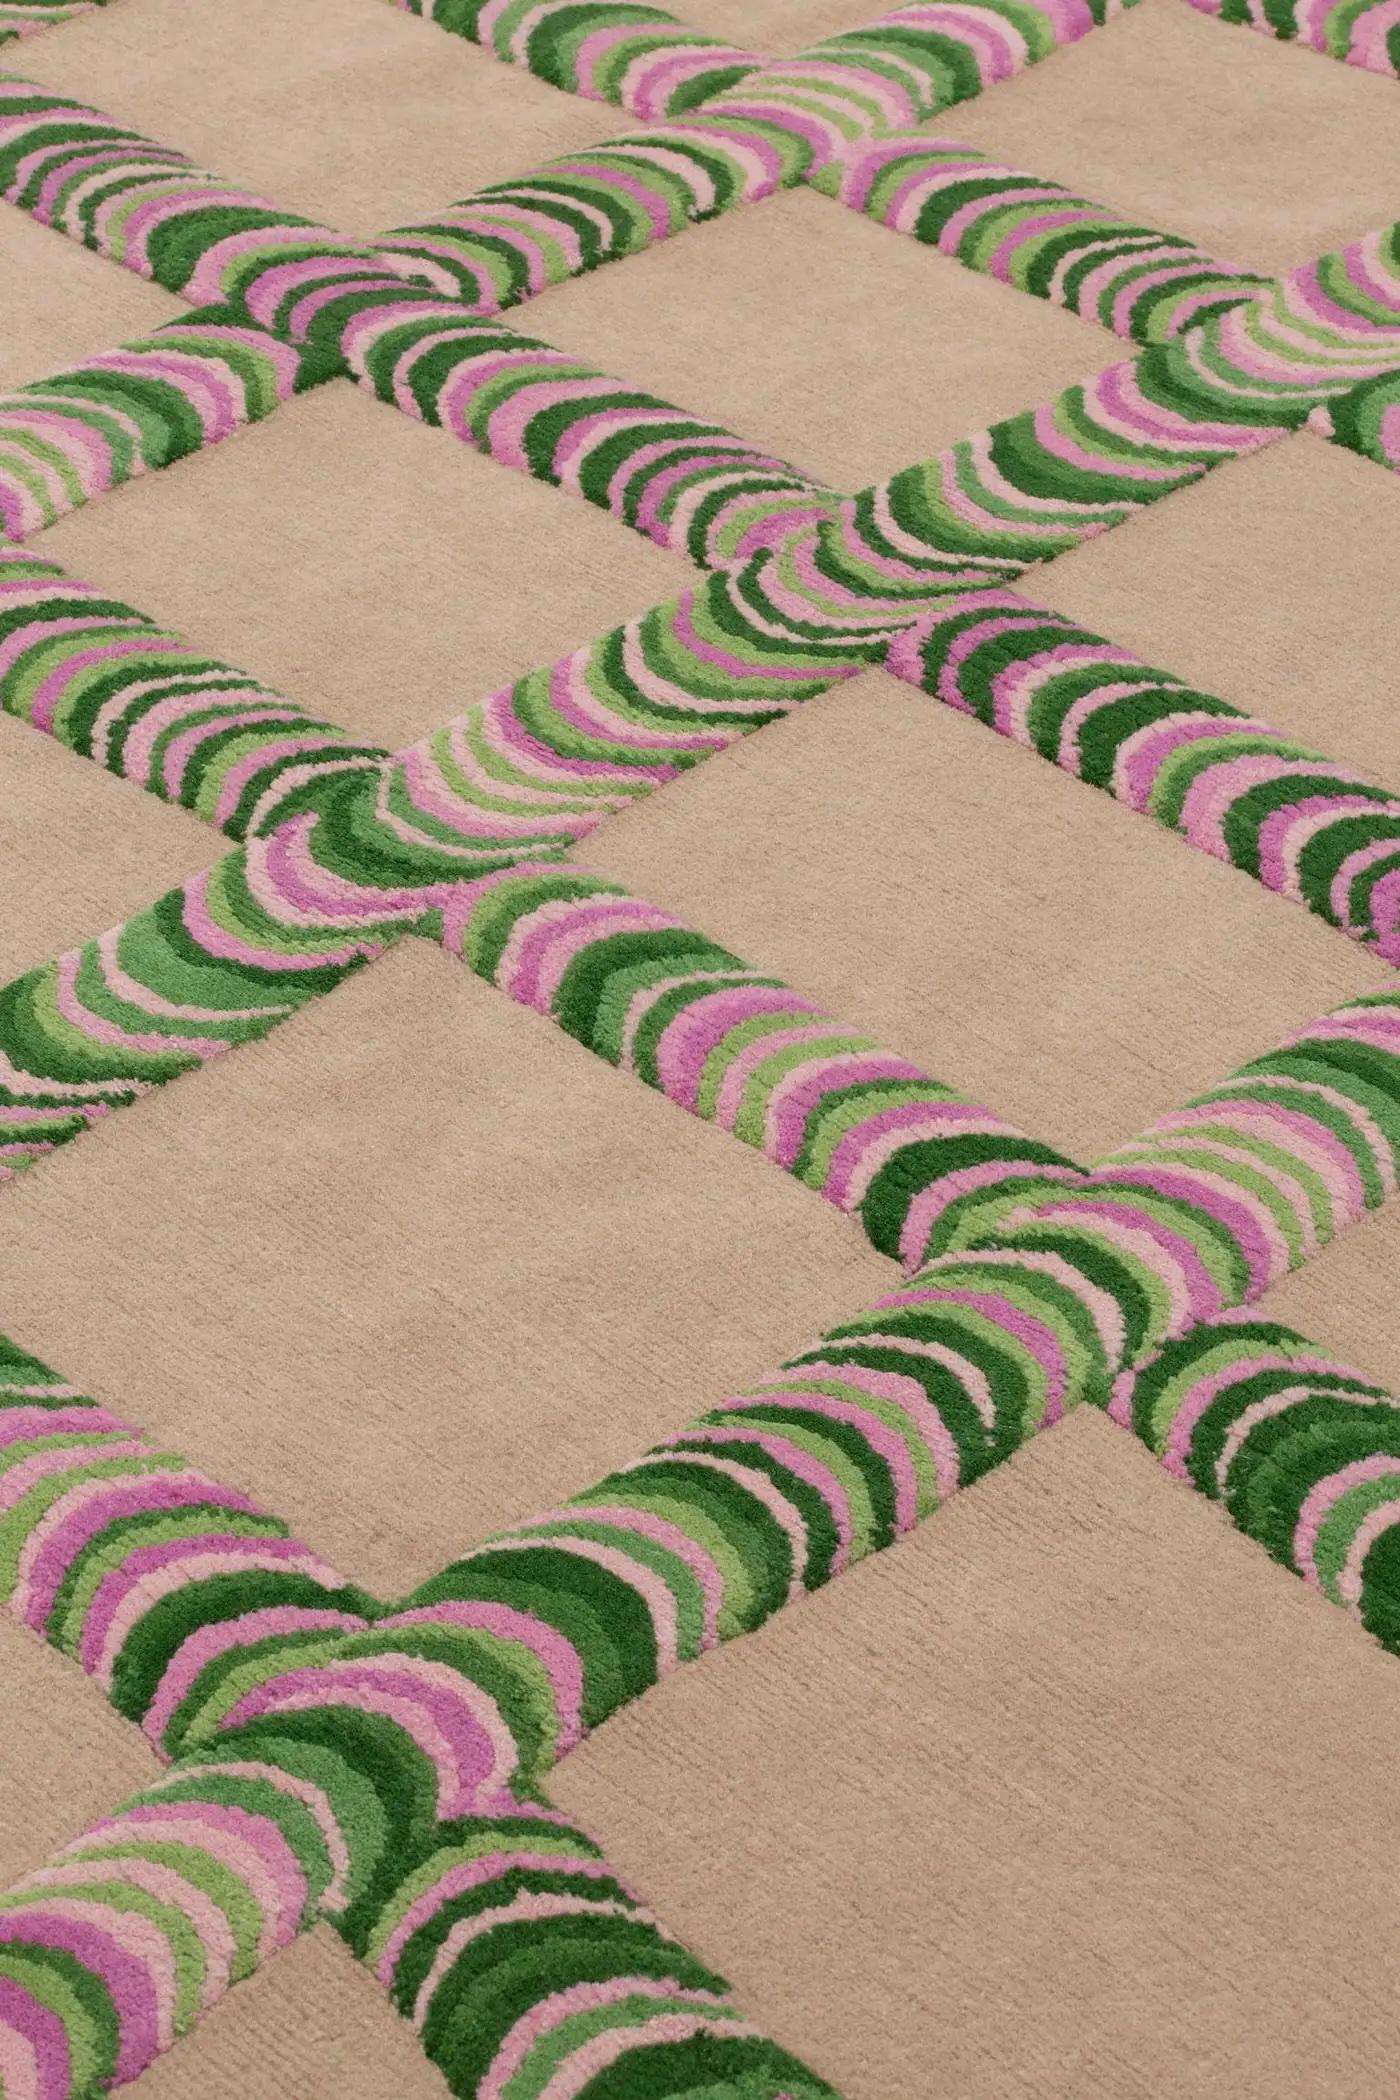 Pipeline Green
Proudly made by hand in Nepal
Designed by Patricia Urquiola
Pipeline, the translation of Patricia Urquiola’s digital artworks into a collection of hand-made rugs and wall-hangings where a series of connected tubes emerge from the